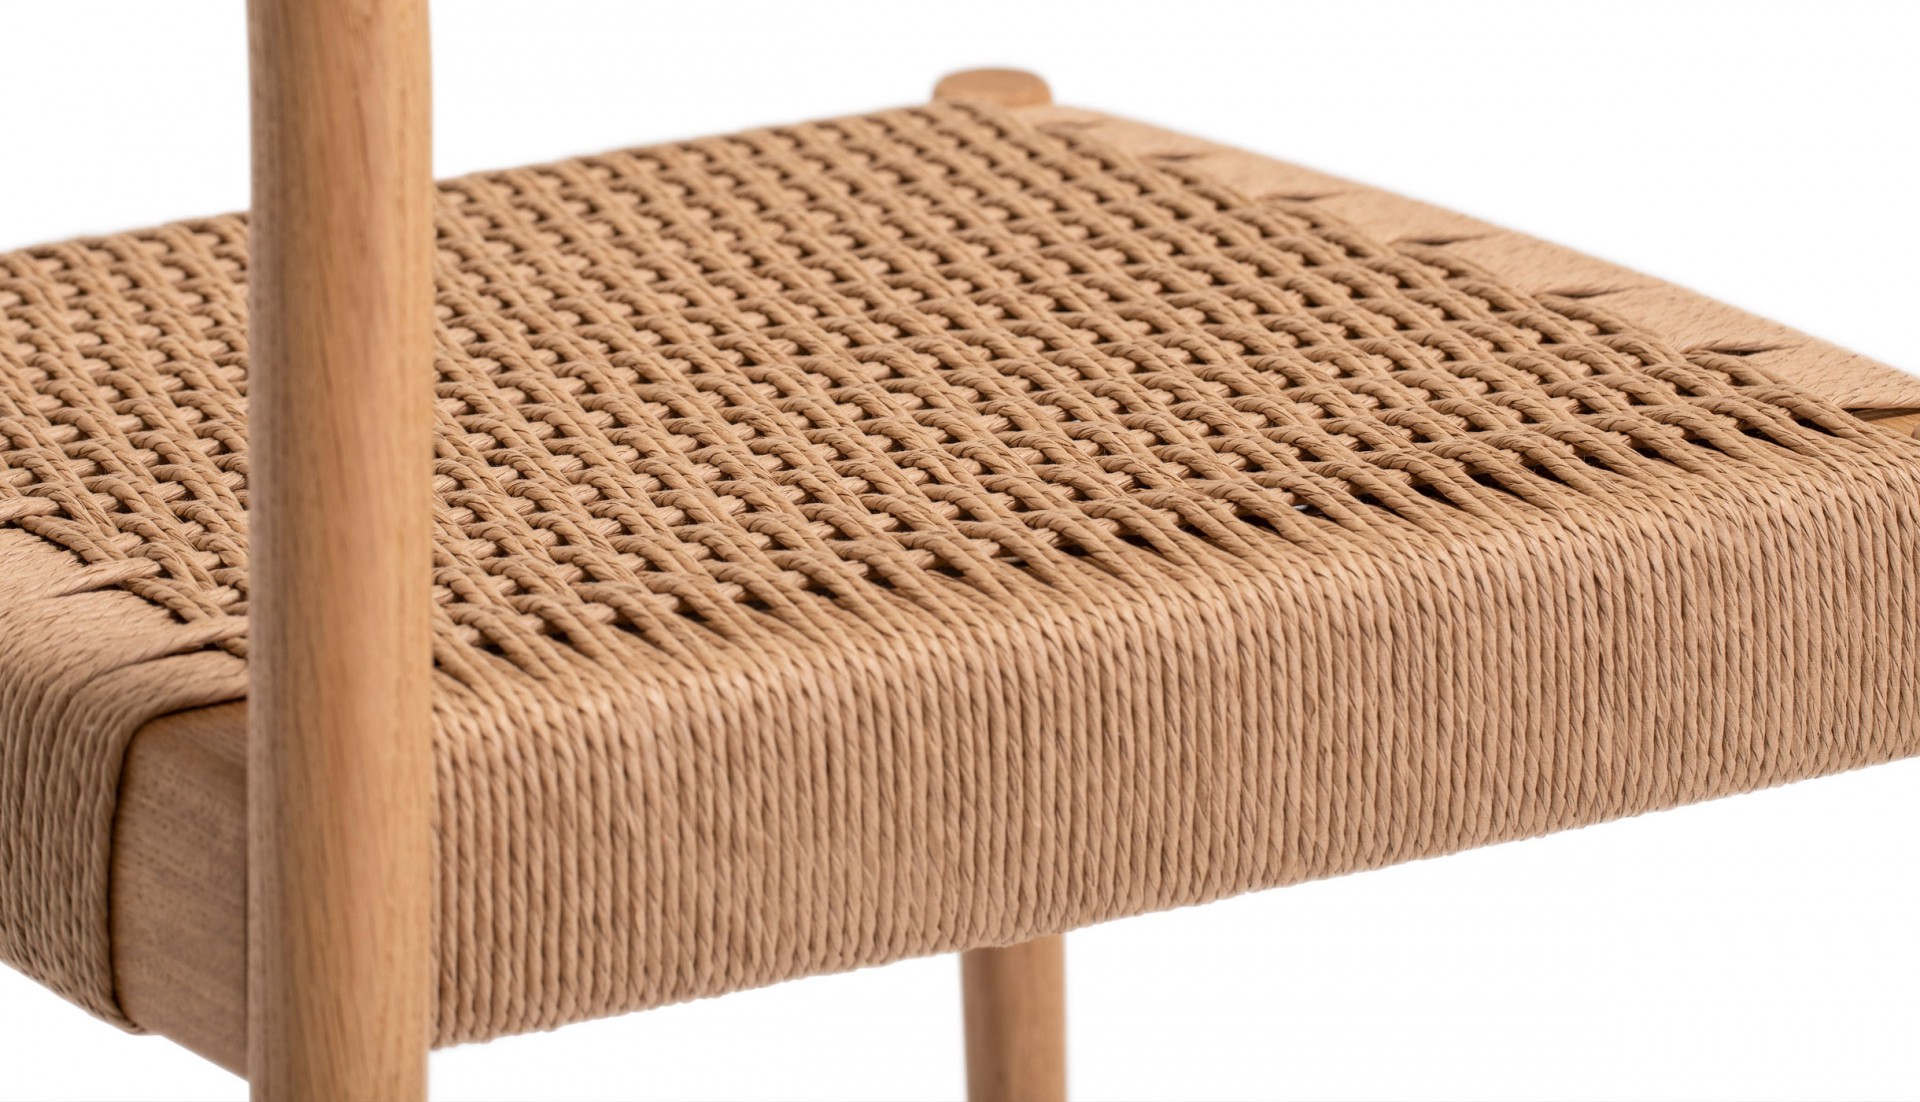 Bogart chair with braided seat in paper rope - Vergés